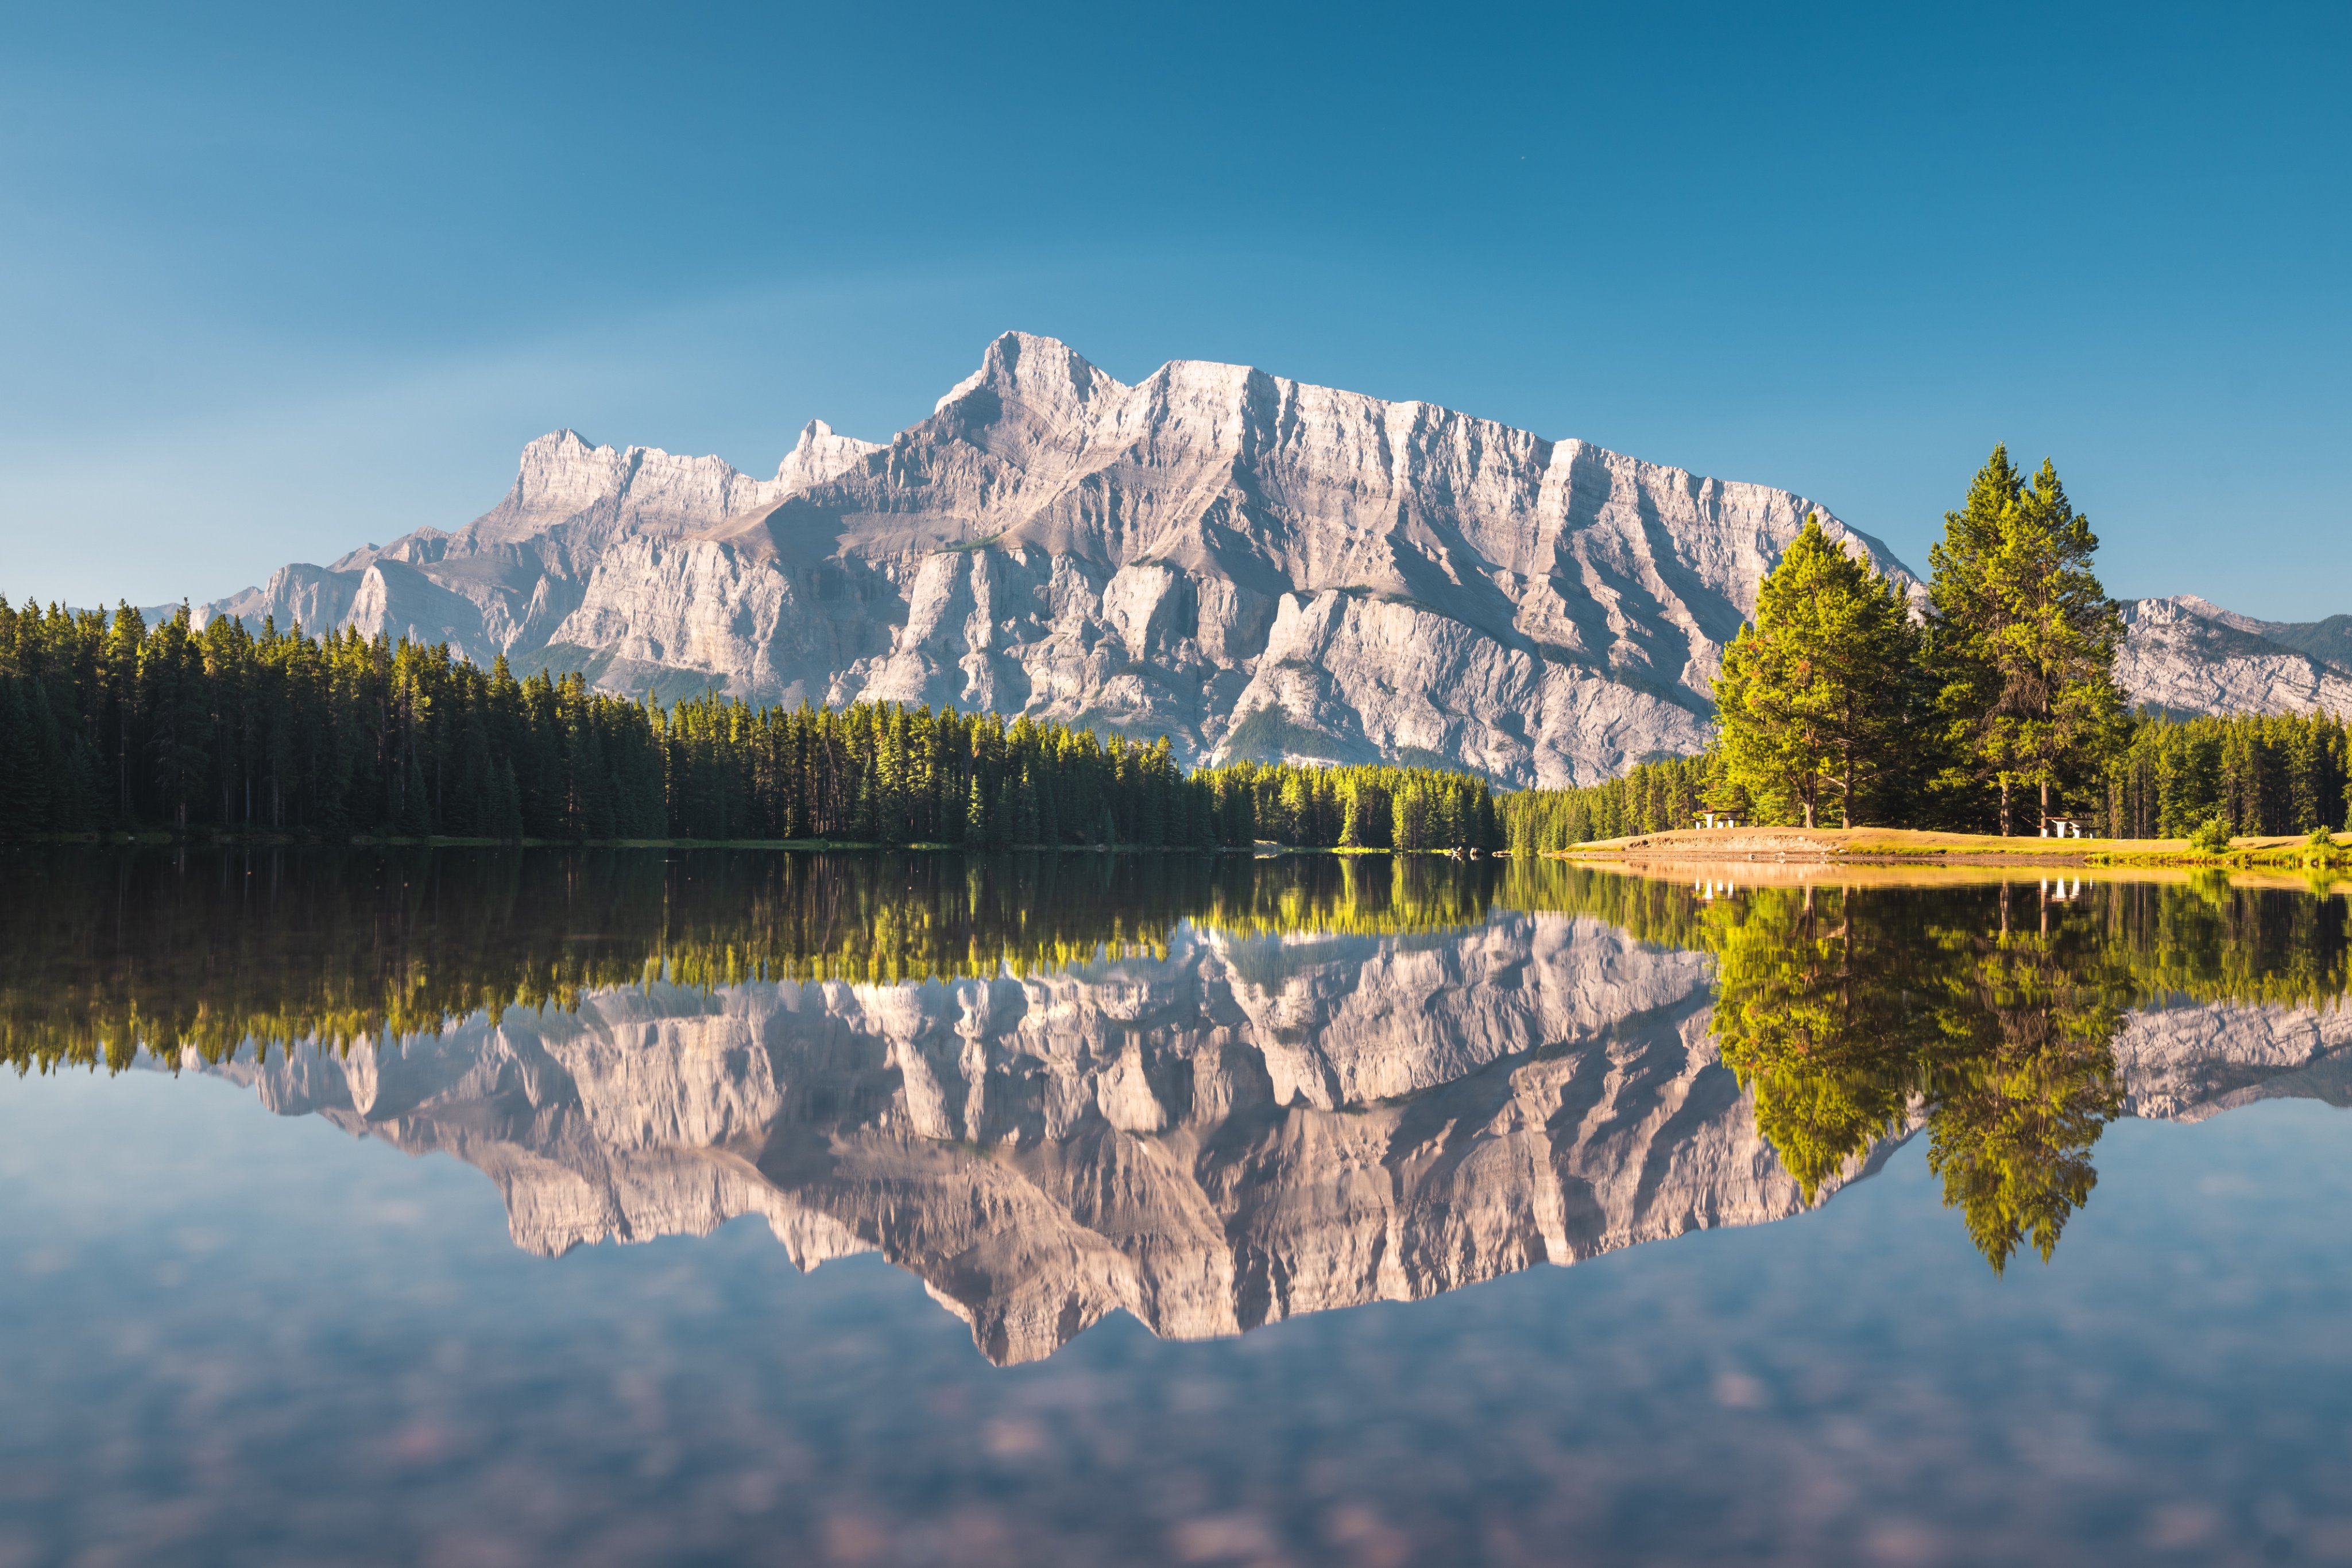 General 4096x2731 landscape nature mountains lake reflection pine trees forest